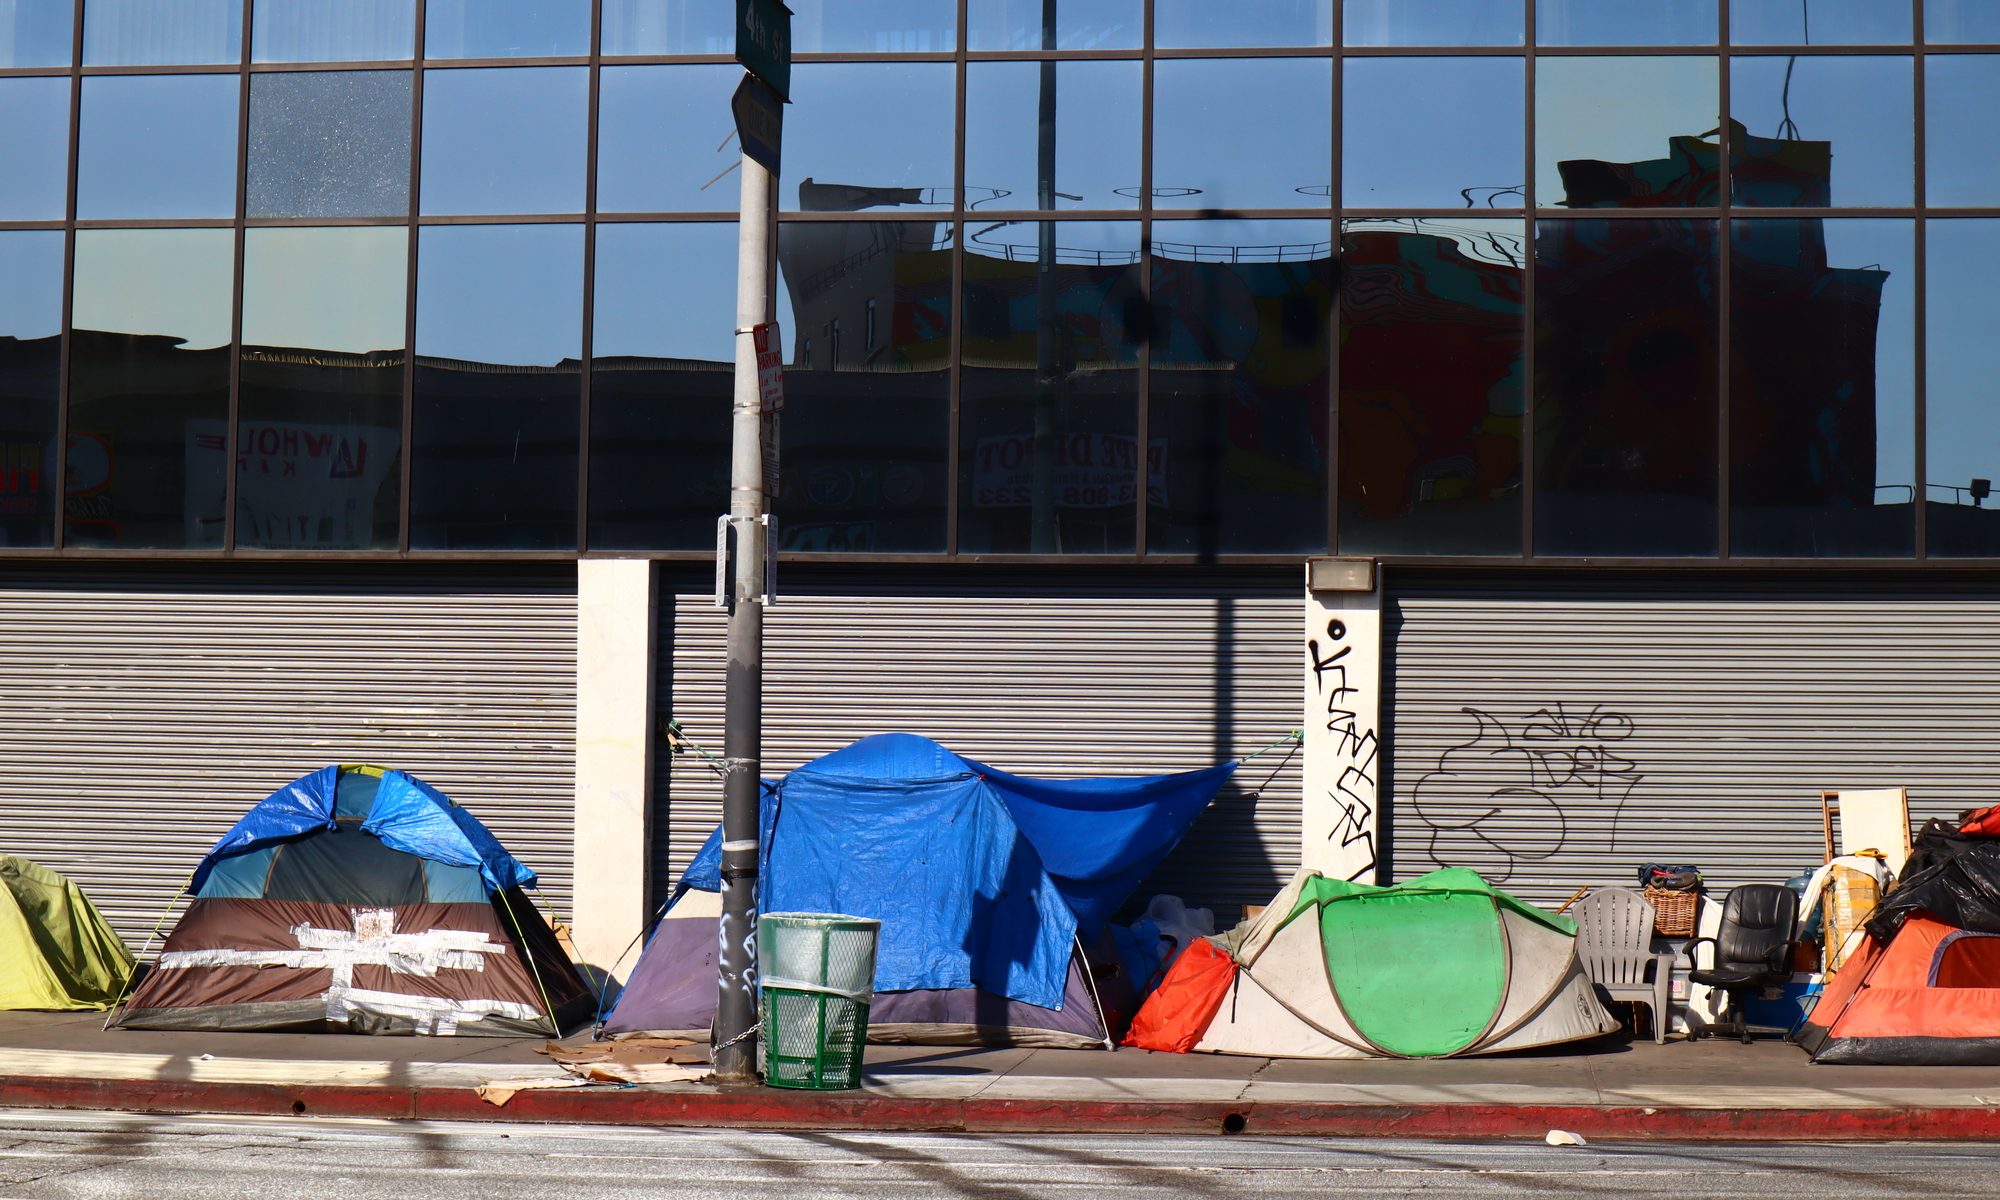 photograph of homeless tents in downtown Los Angeles